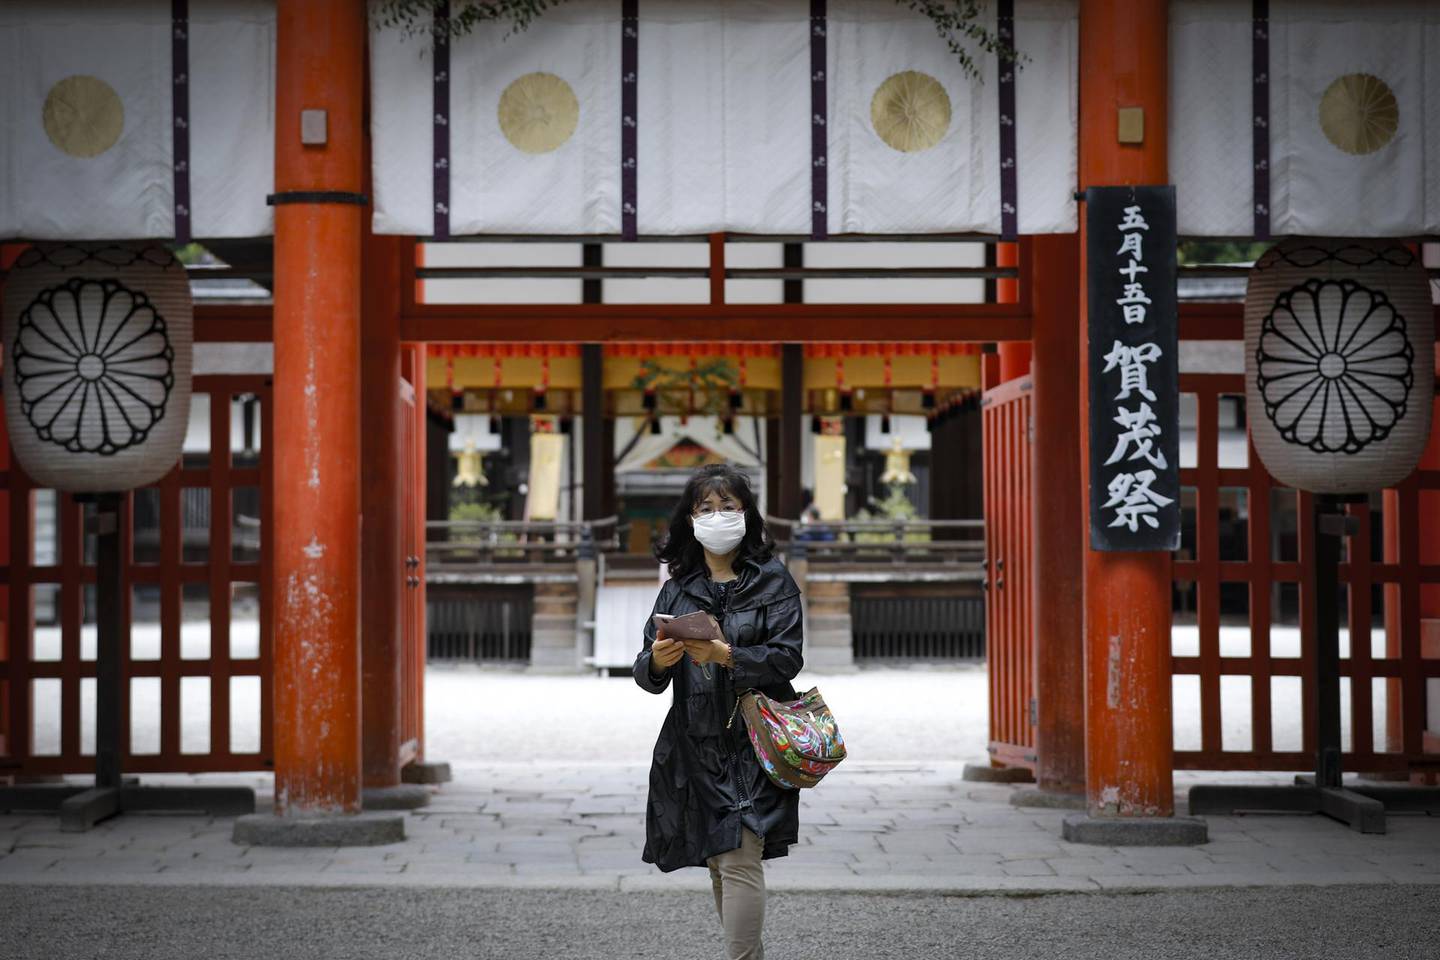 epa08423615 A woman wearing a face mask looks on at Shimogamo Shrine in Kyoto, Japan, 15 May 2020. The streets of Japan's ancient imperial capital and its world-famous tourist spots are largely deserted as the number of foreign visitors has plummeted by more than 93 percent compared to last year, local media reported in late April. Japan's tourism industry has been hit hard by the ongoing COVID-19 pandemic, putting millions of tourism-dependent jobs at risk. Kyoto is one of prefectures that remain in a state of emergency the government imposed in a bid to curb the spread of the coronavirus SARS-CoV-2 which causes the COVID-19 disease. Japan on 14 May 2020 lifted the measure in most parts of the country.  EPA/DAI KUROKAWA